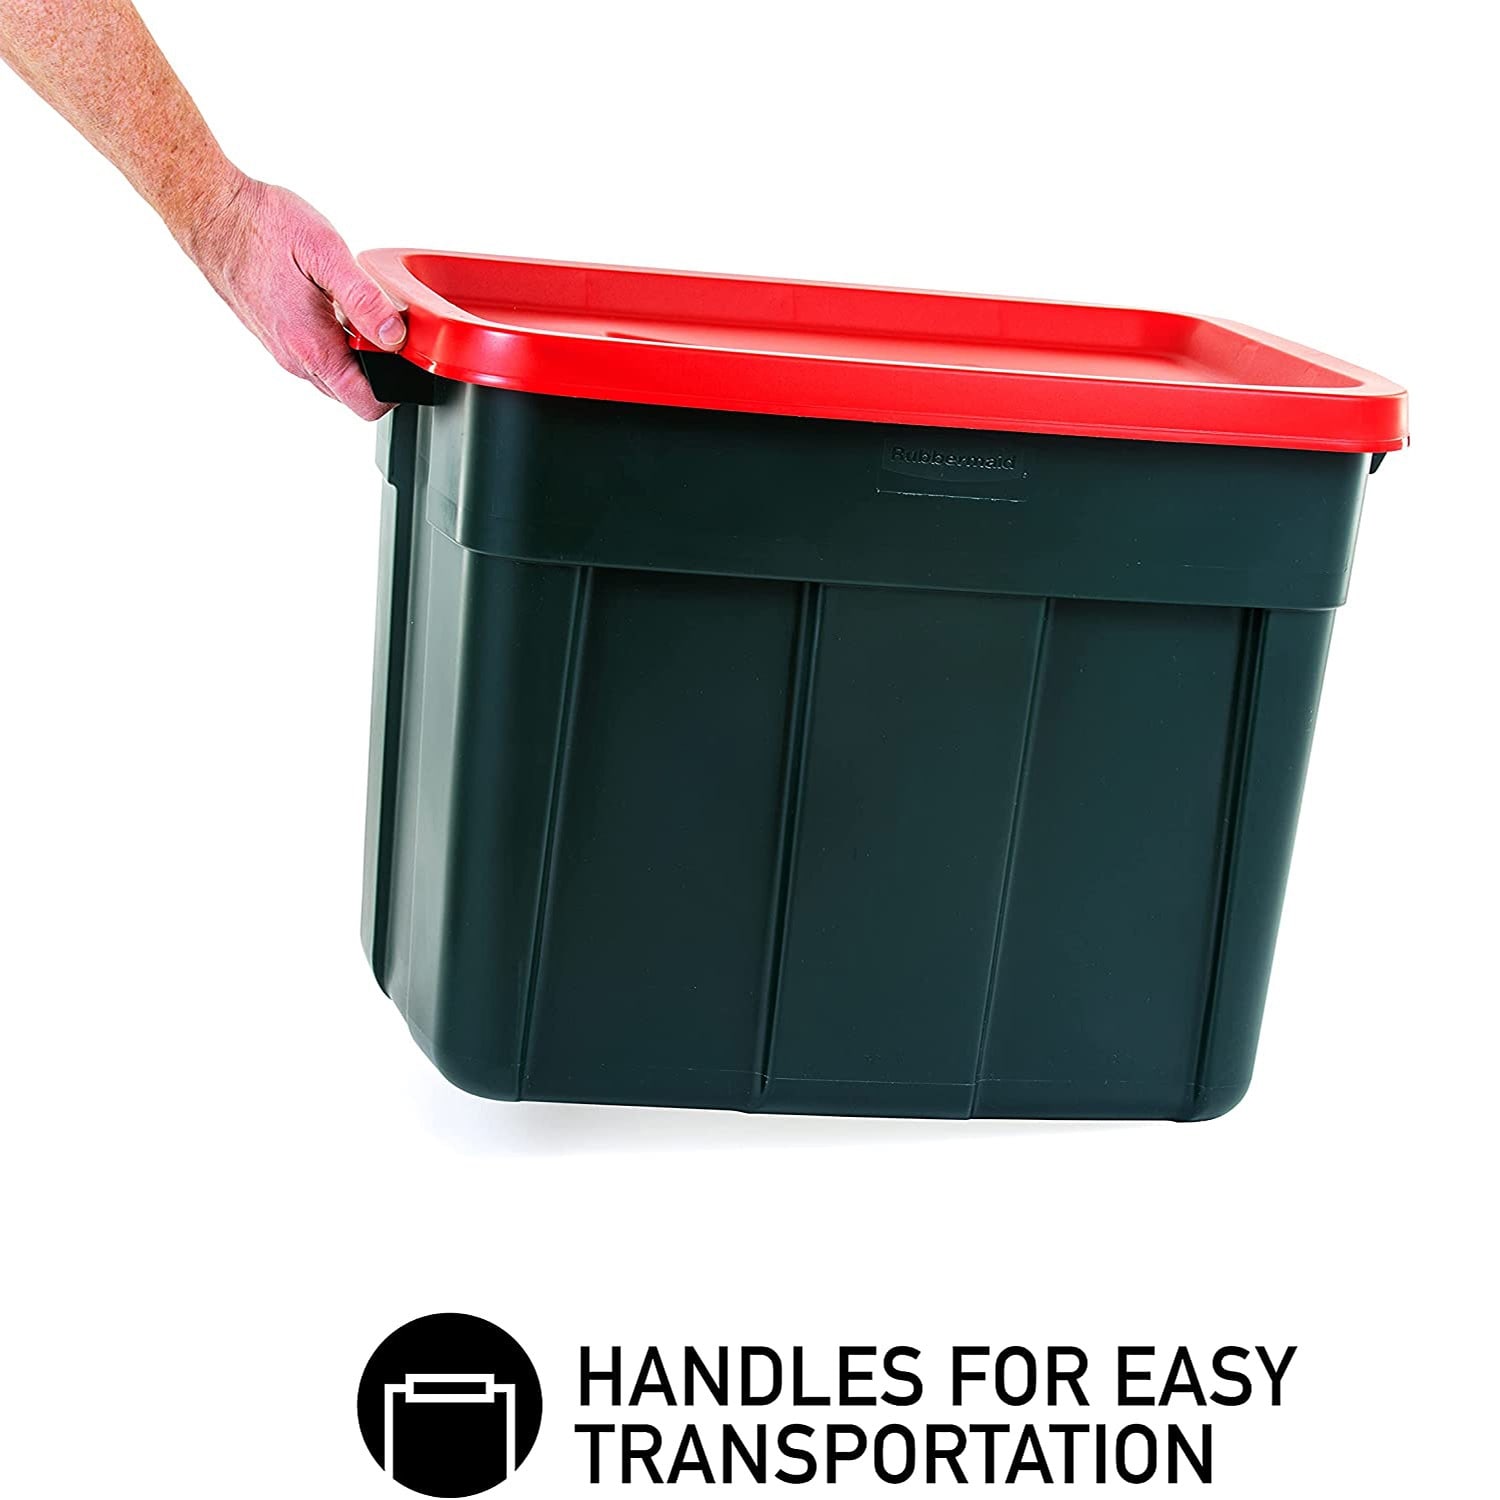 https://ak1.ostkcdn.com/images/products/is/images/direct/219b357048e6422fb39c56d4639c828a460433ba/Rubbermaid-Roughneck-18-Gal-Plastic-Holiday-Storage-Tote%2C-Green-and-Red-%286-Pack%29.jpg